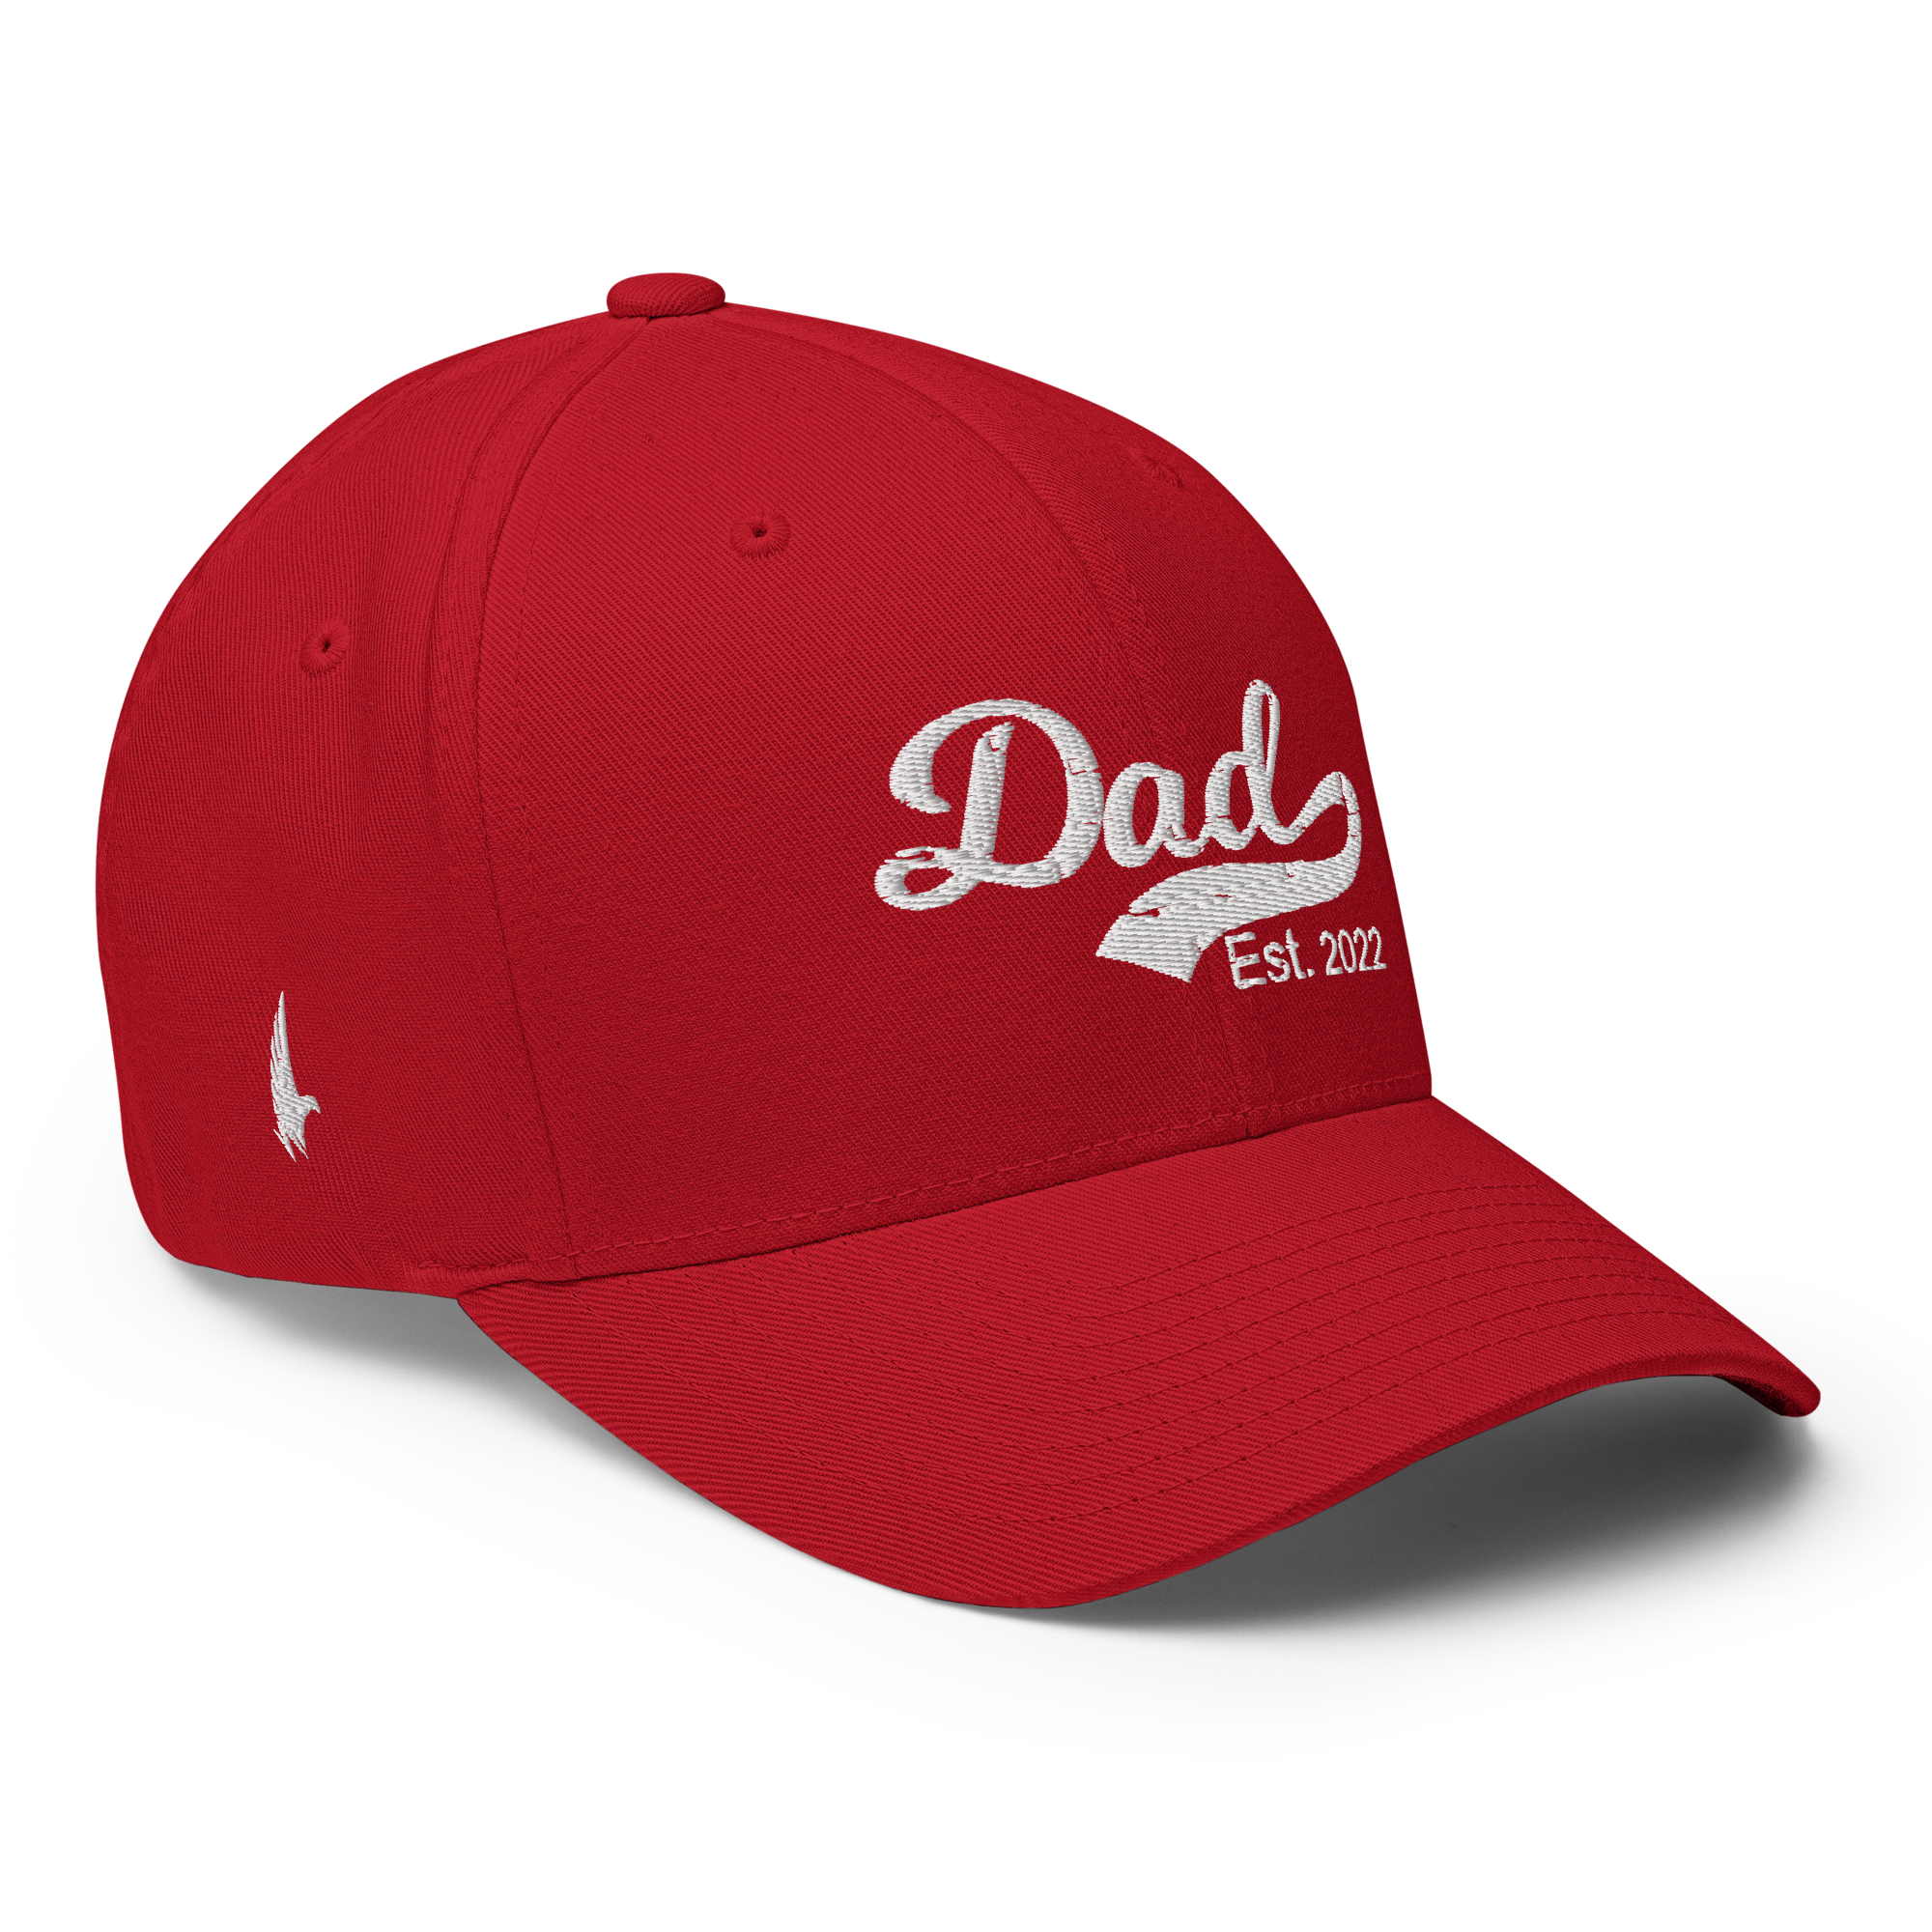 Dad Est 2022 Fitted Hat - Red - Loyalty Vibes